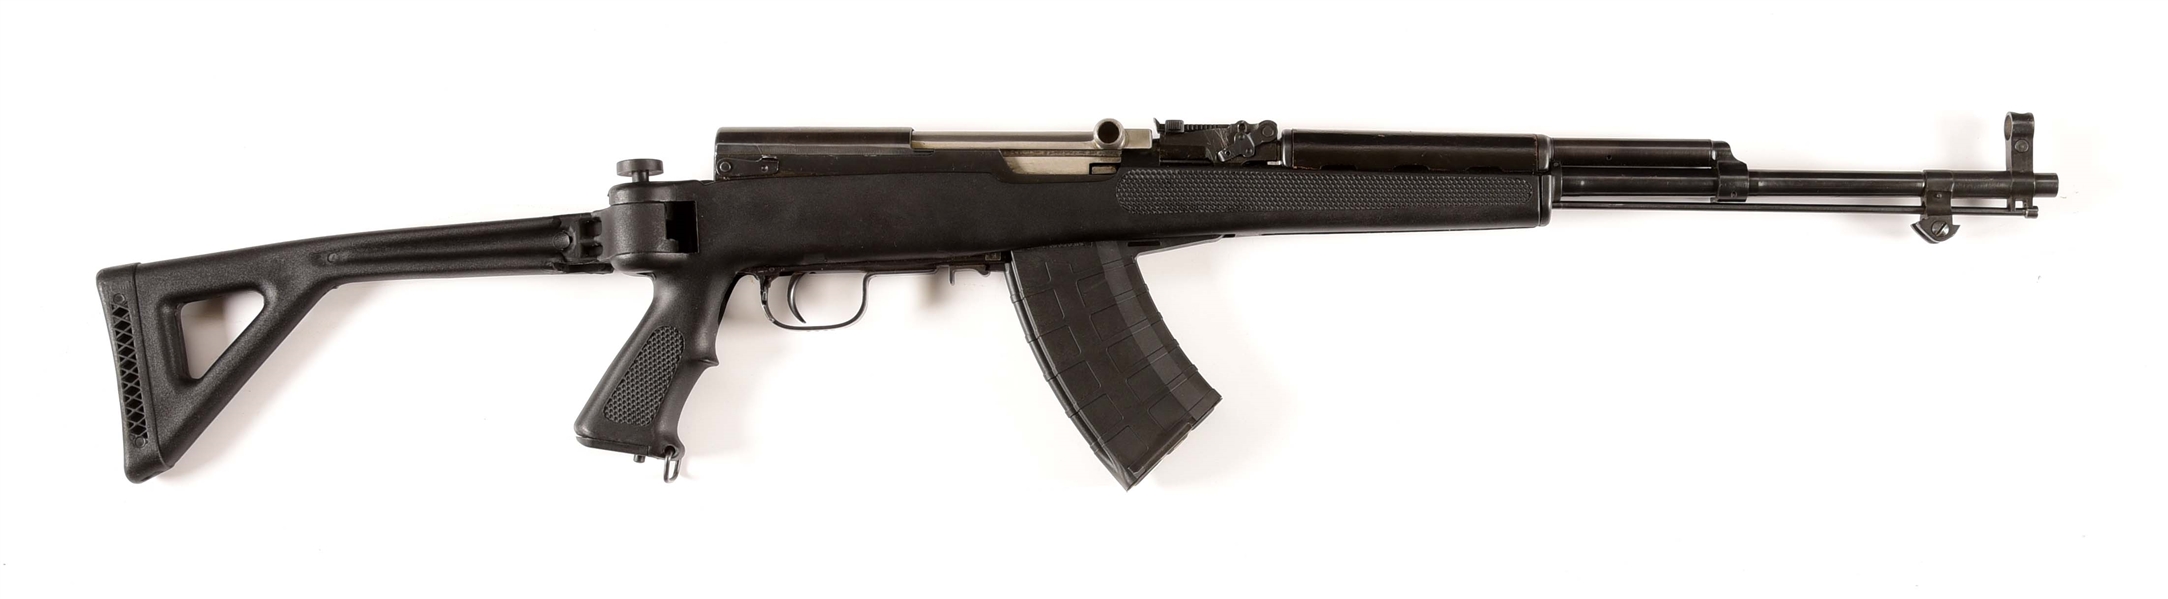 (M) CHINESE FACTORY 0144 TYPE 56 SKS SEMI-AUTOMATIC RIFLE WITH POLYMER STOCK & DETACHABLE MAGAZINE.